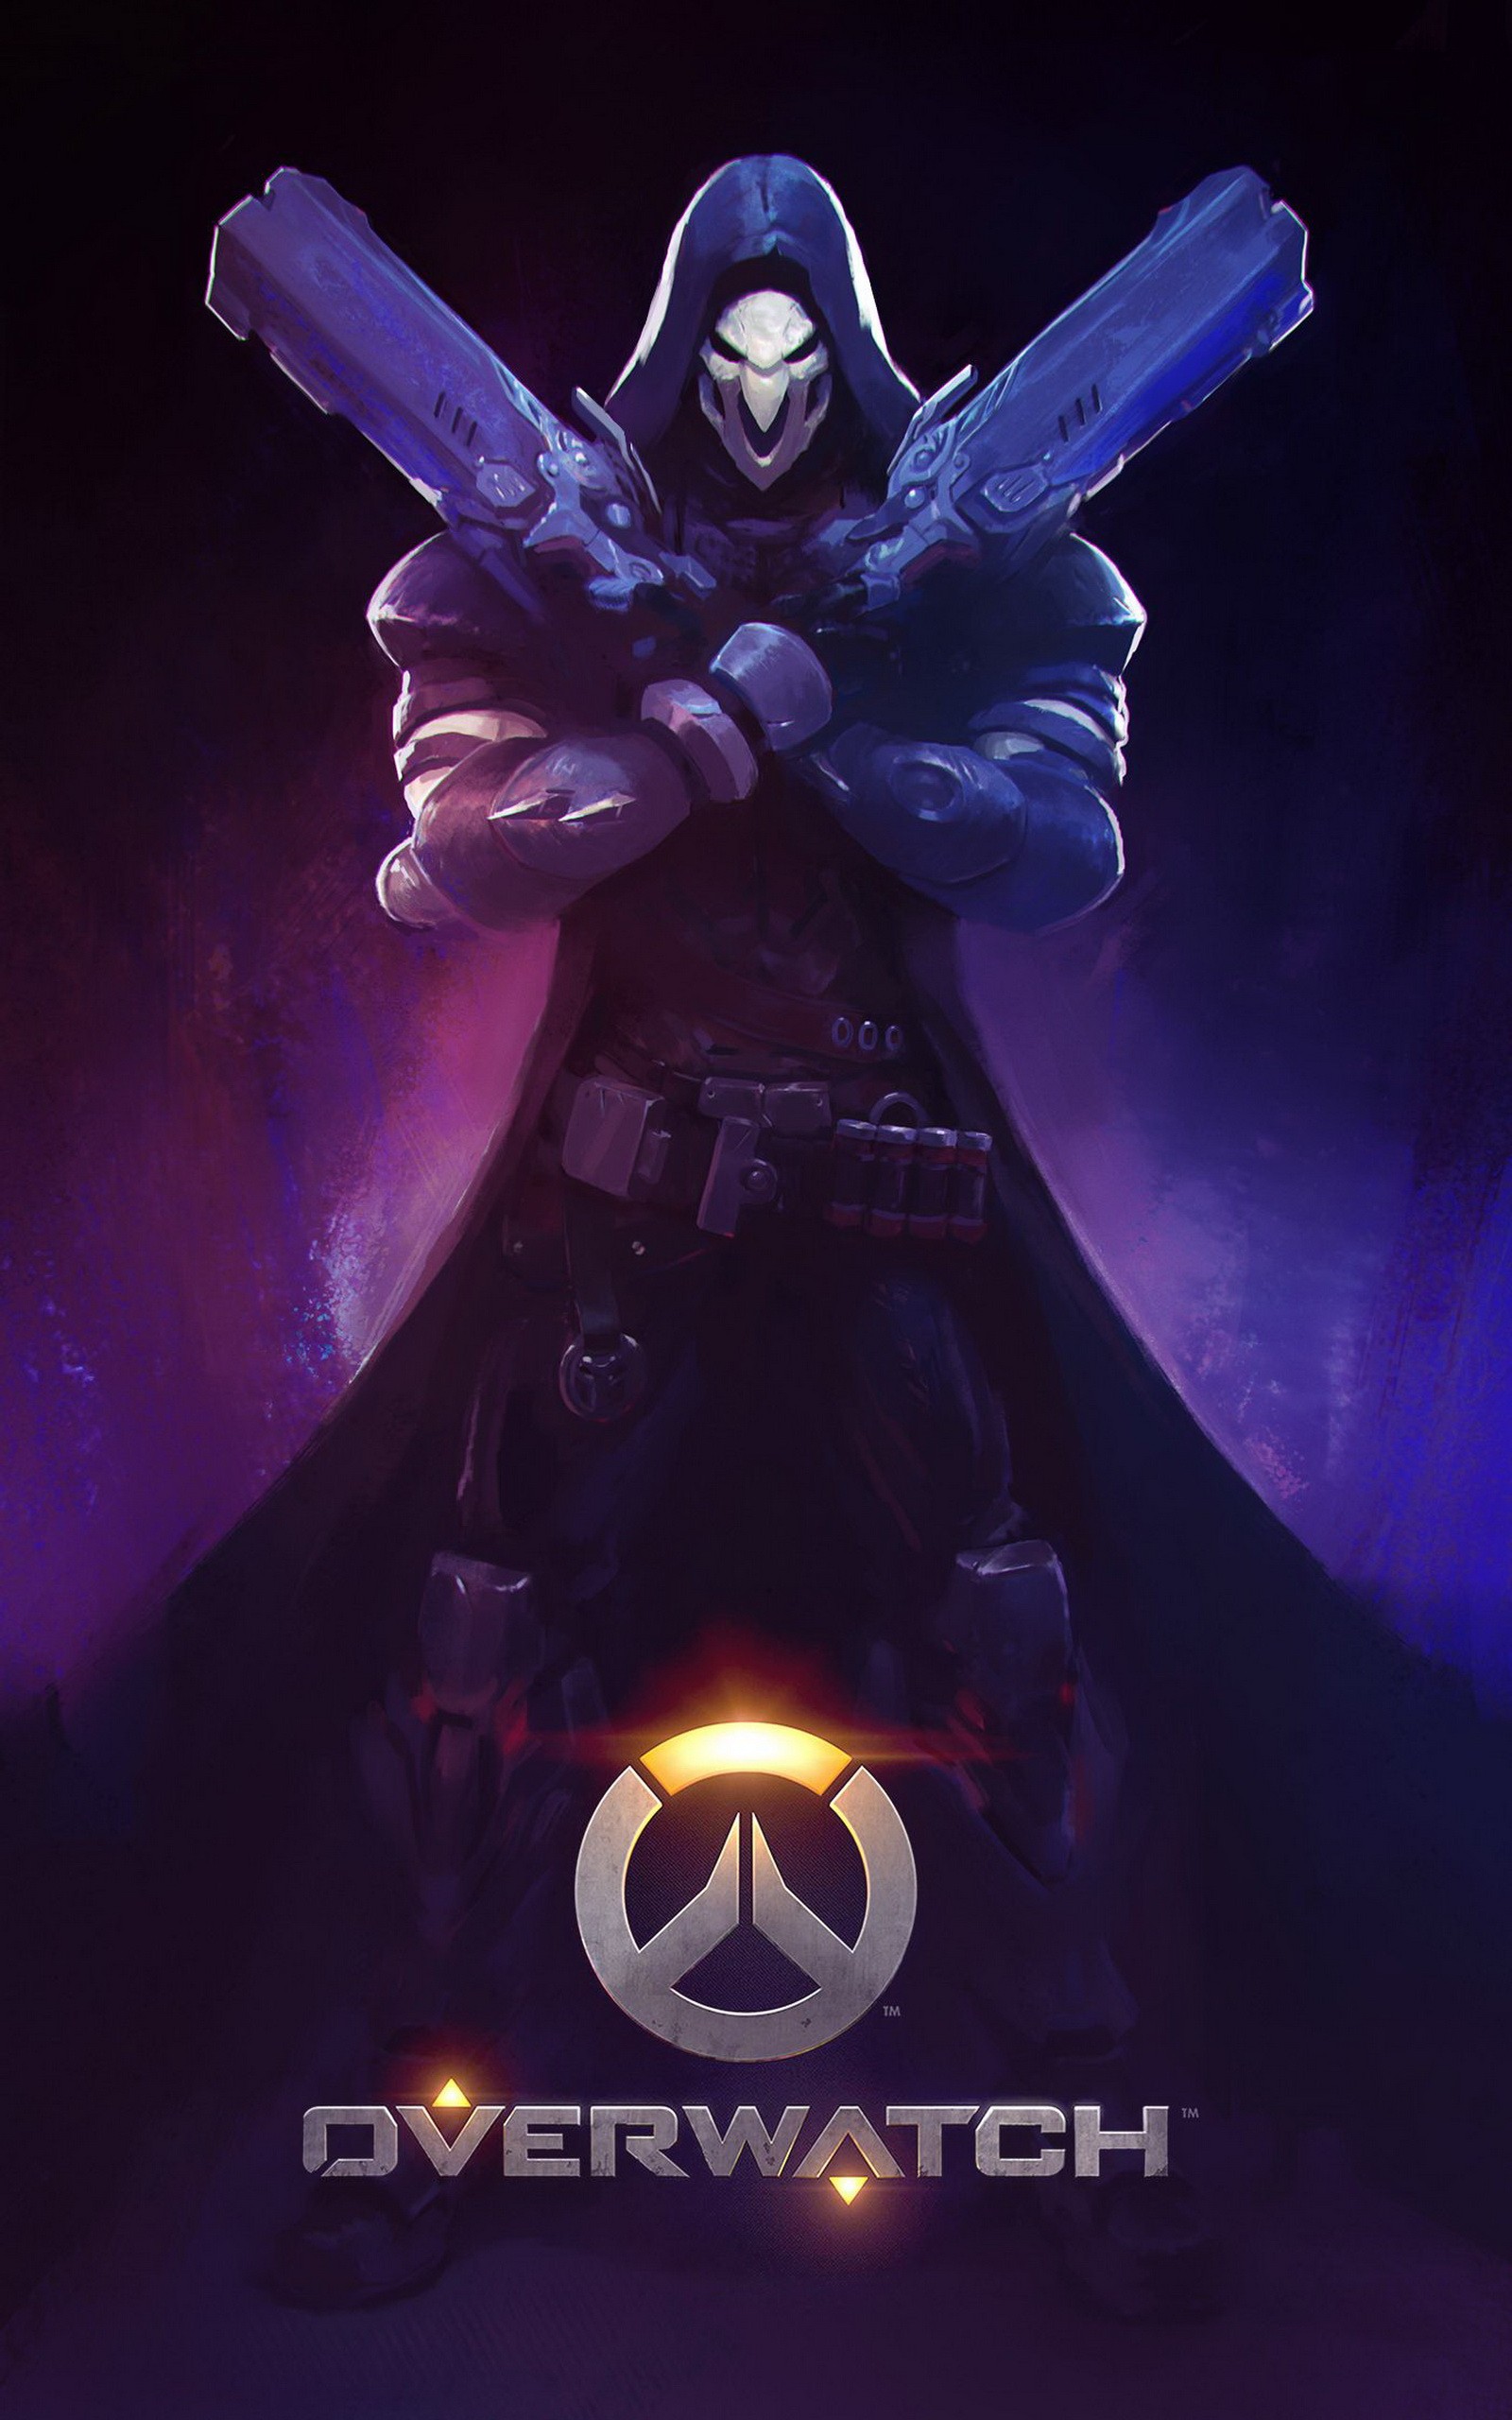 Overwatch wallpaper phone ·① Download free cool HD ...
